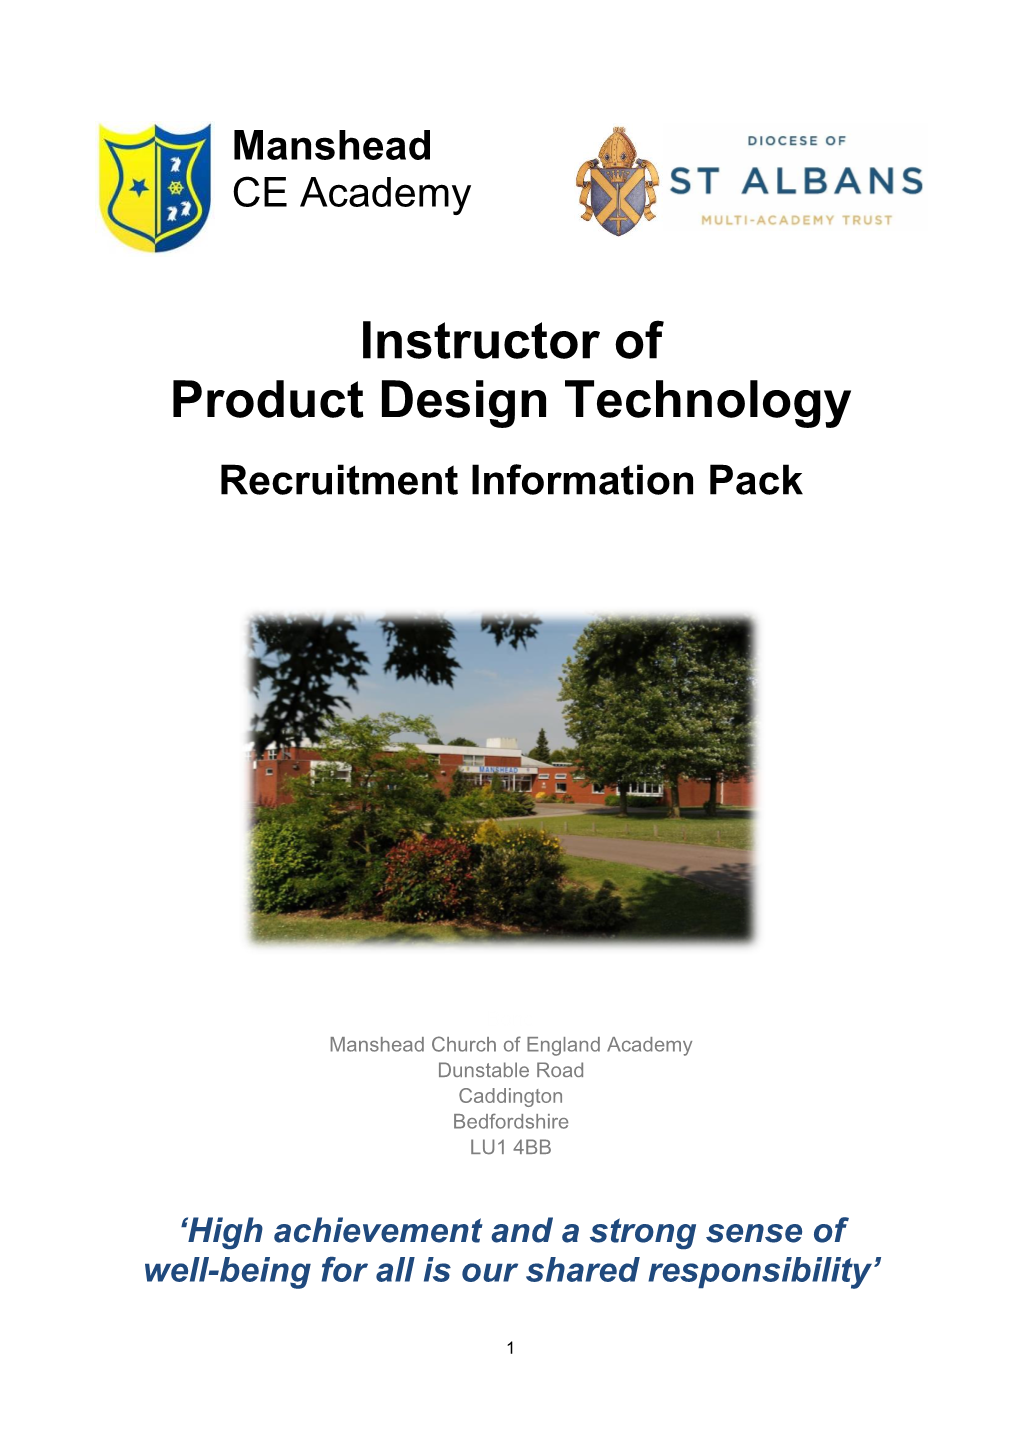 Instructor of Product Design Technology